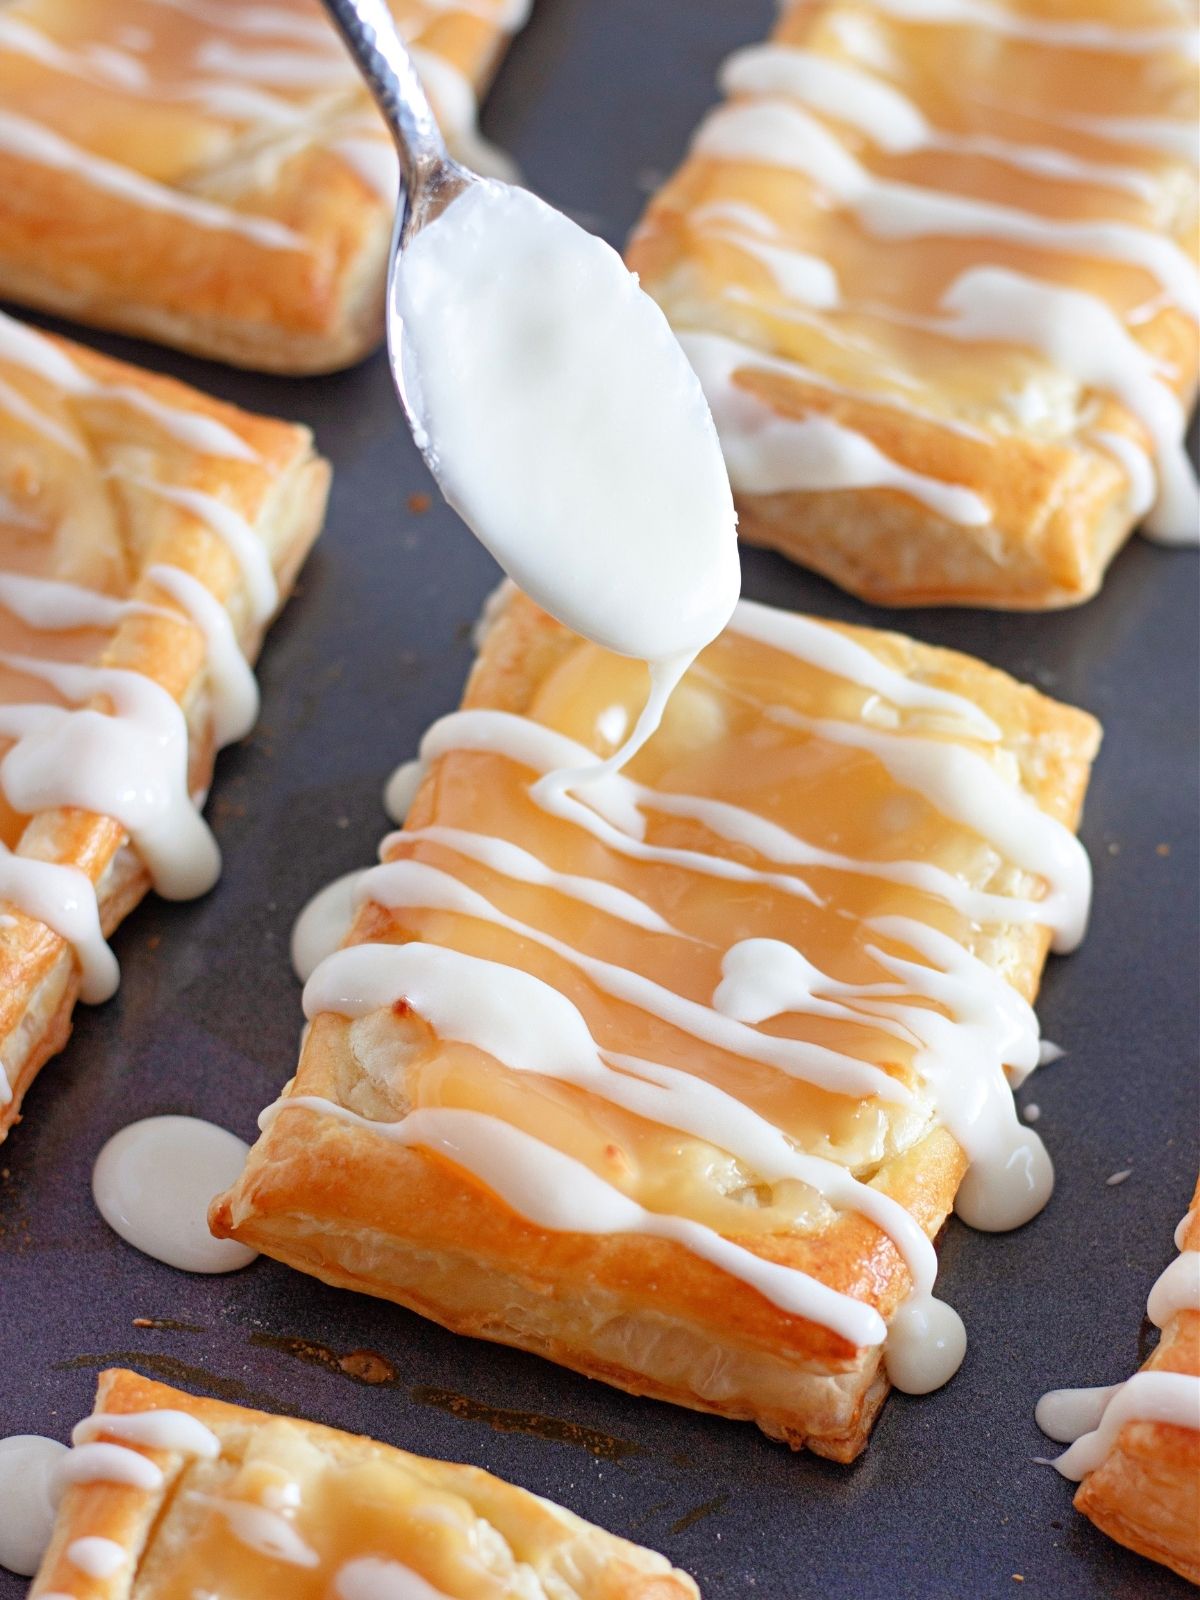 Puff pastry Danish baked with drizzled powdered sugar glaze.